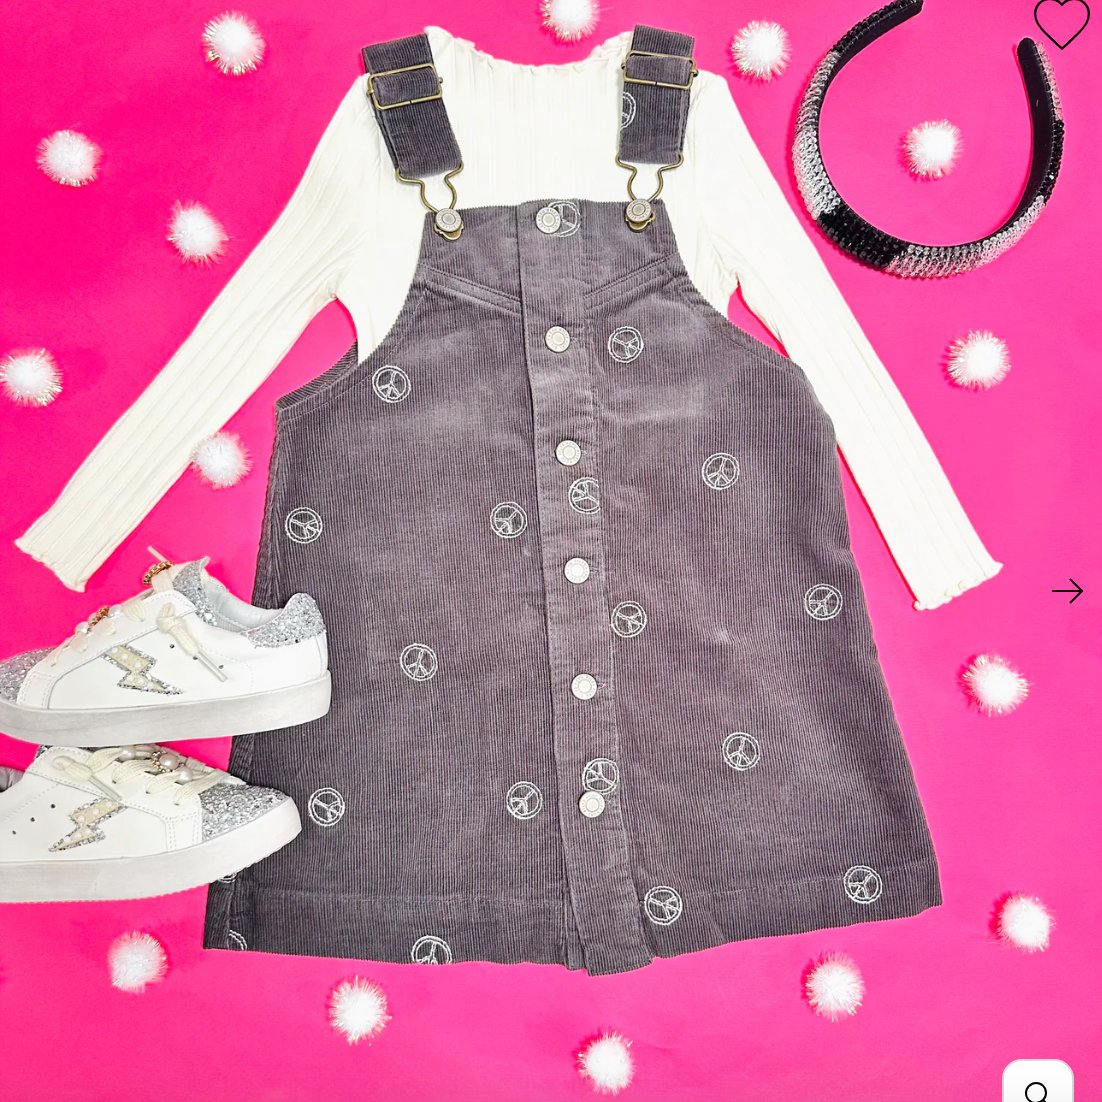 5 Rylee + Cru Kids Clothing Pieces Your Mini Needs This Fall - Mini Dreamers